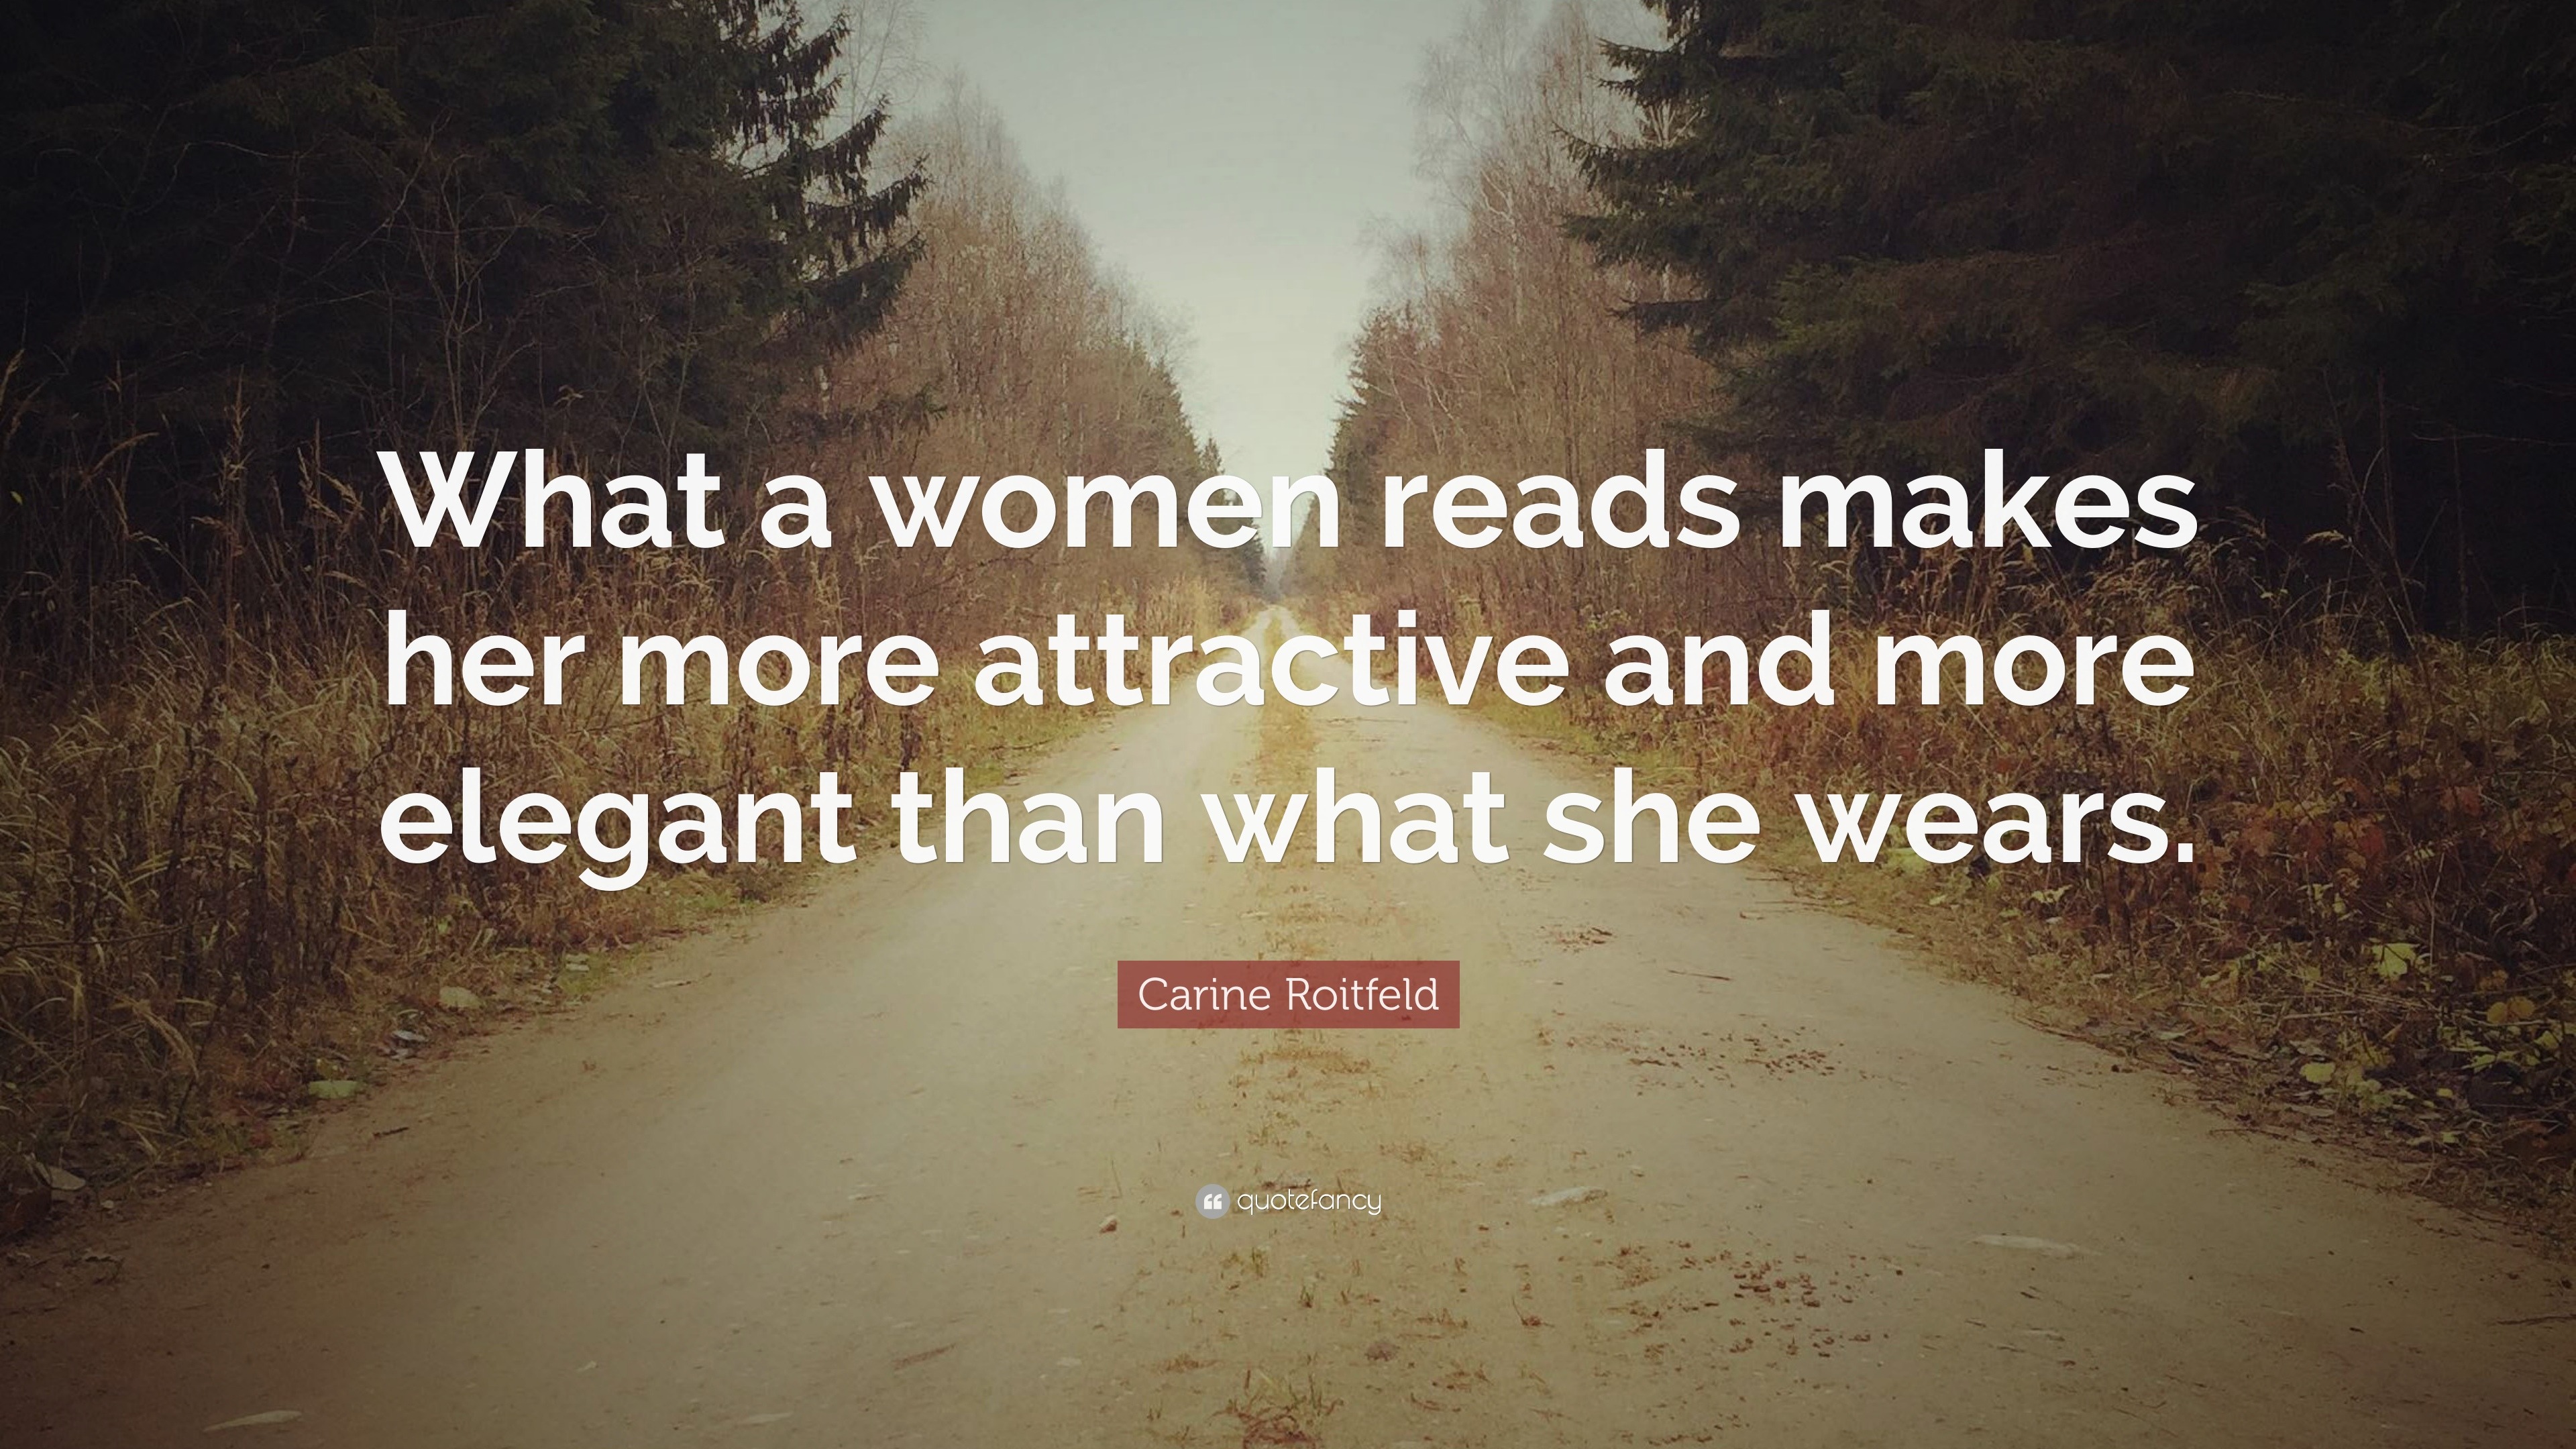 Carine Roitfeld Quote: “What a women reads makes her more attractive ...